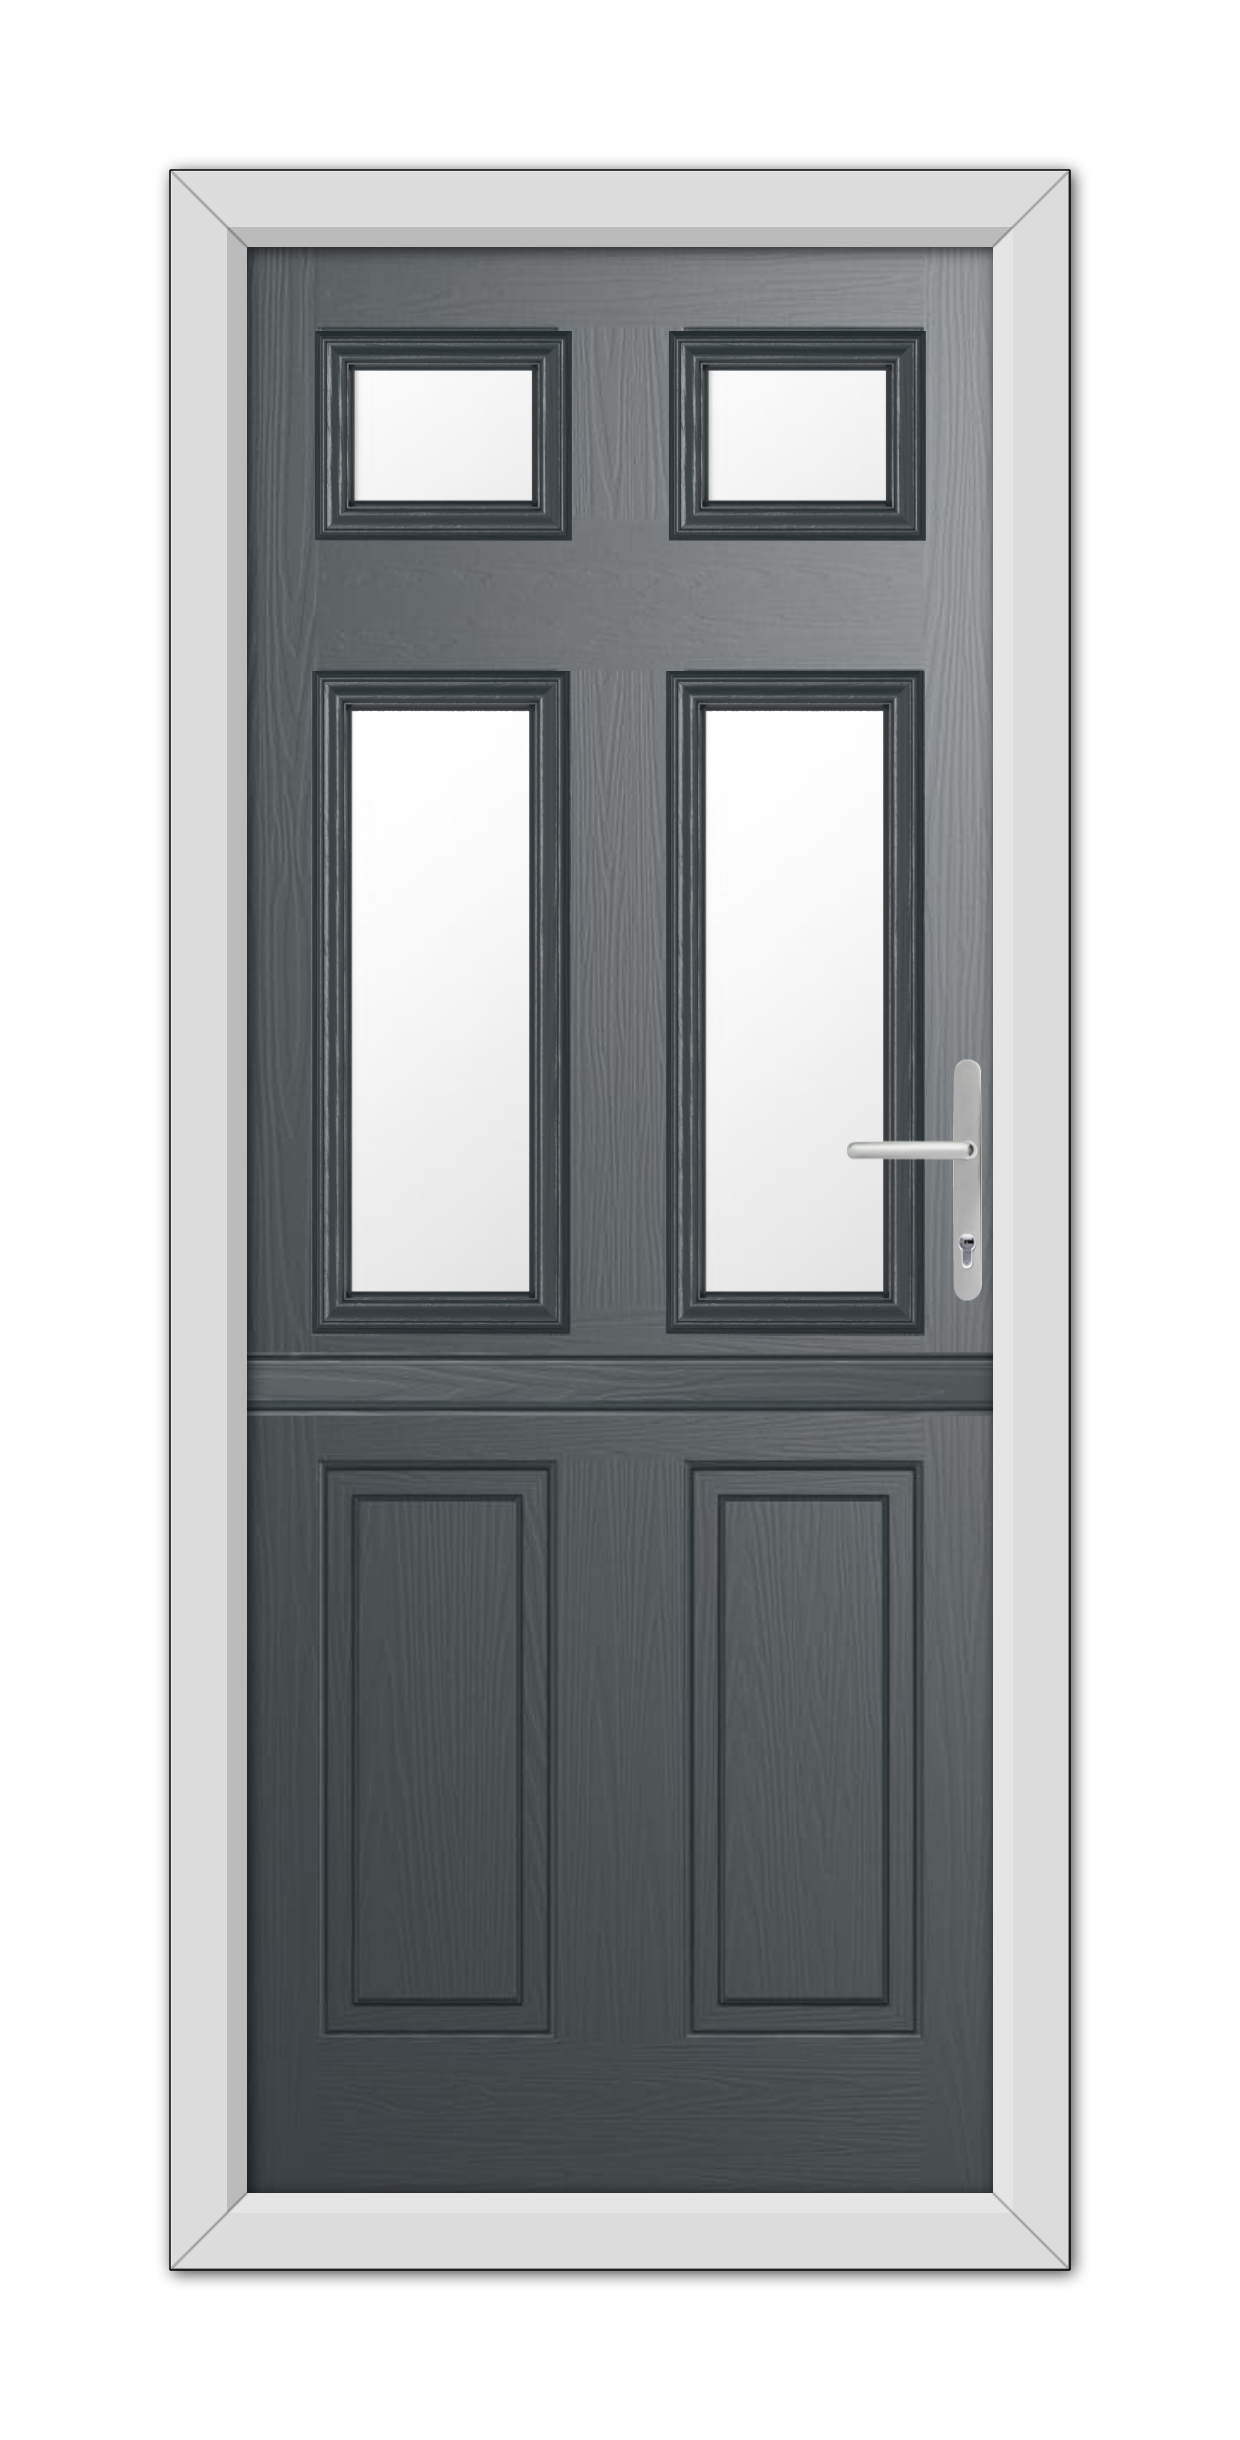 A modern Anthracite Grey Middleton Glazed 4 Stable Composite Door with four panels and three small square windows, set in a white frame, featuring a silver handle on the right.